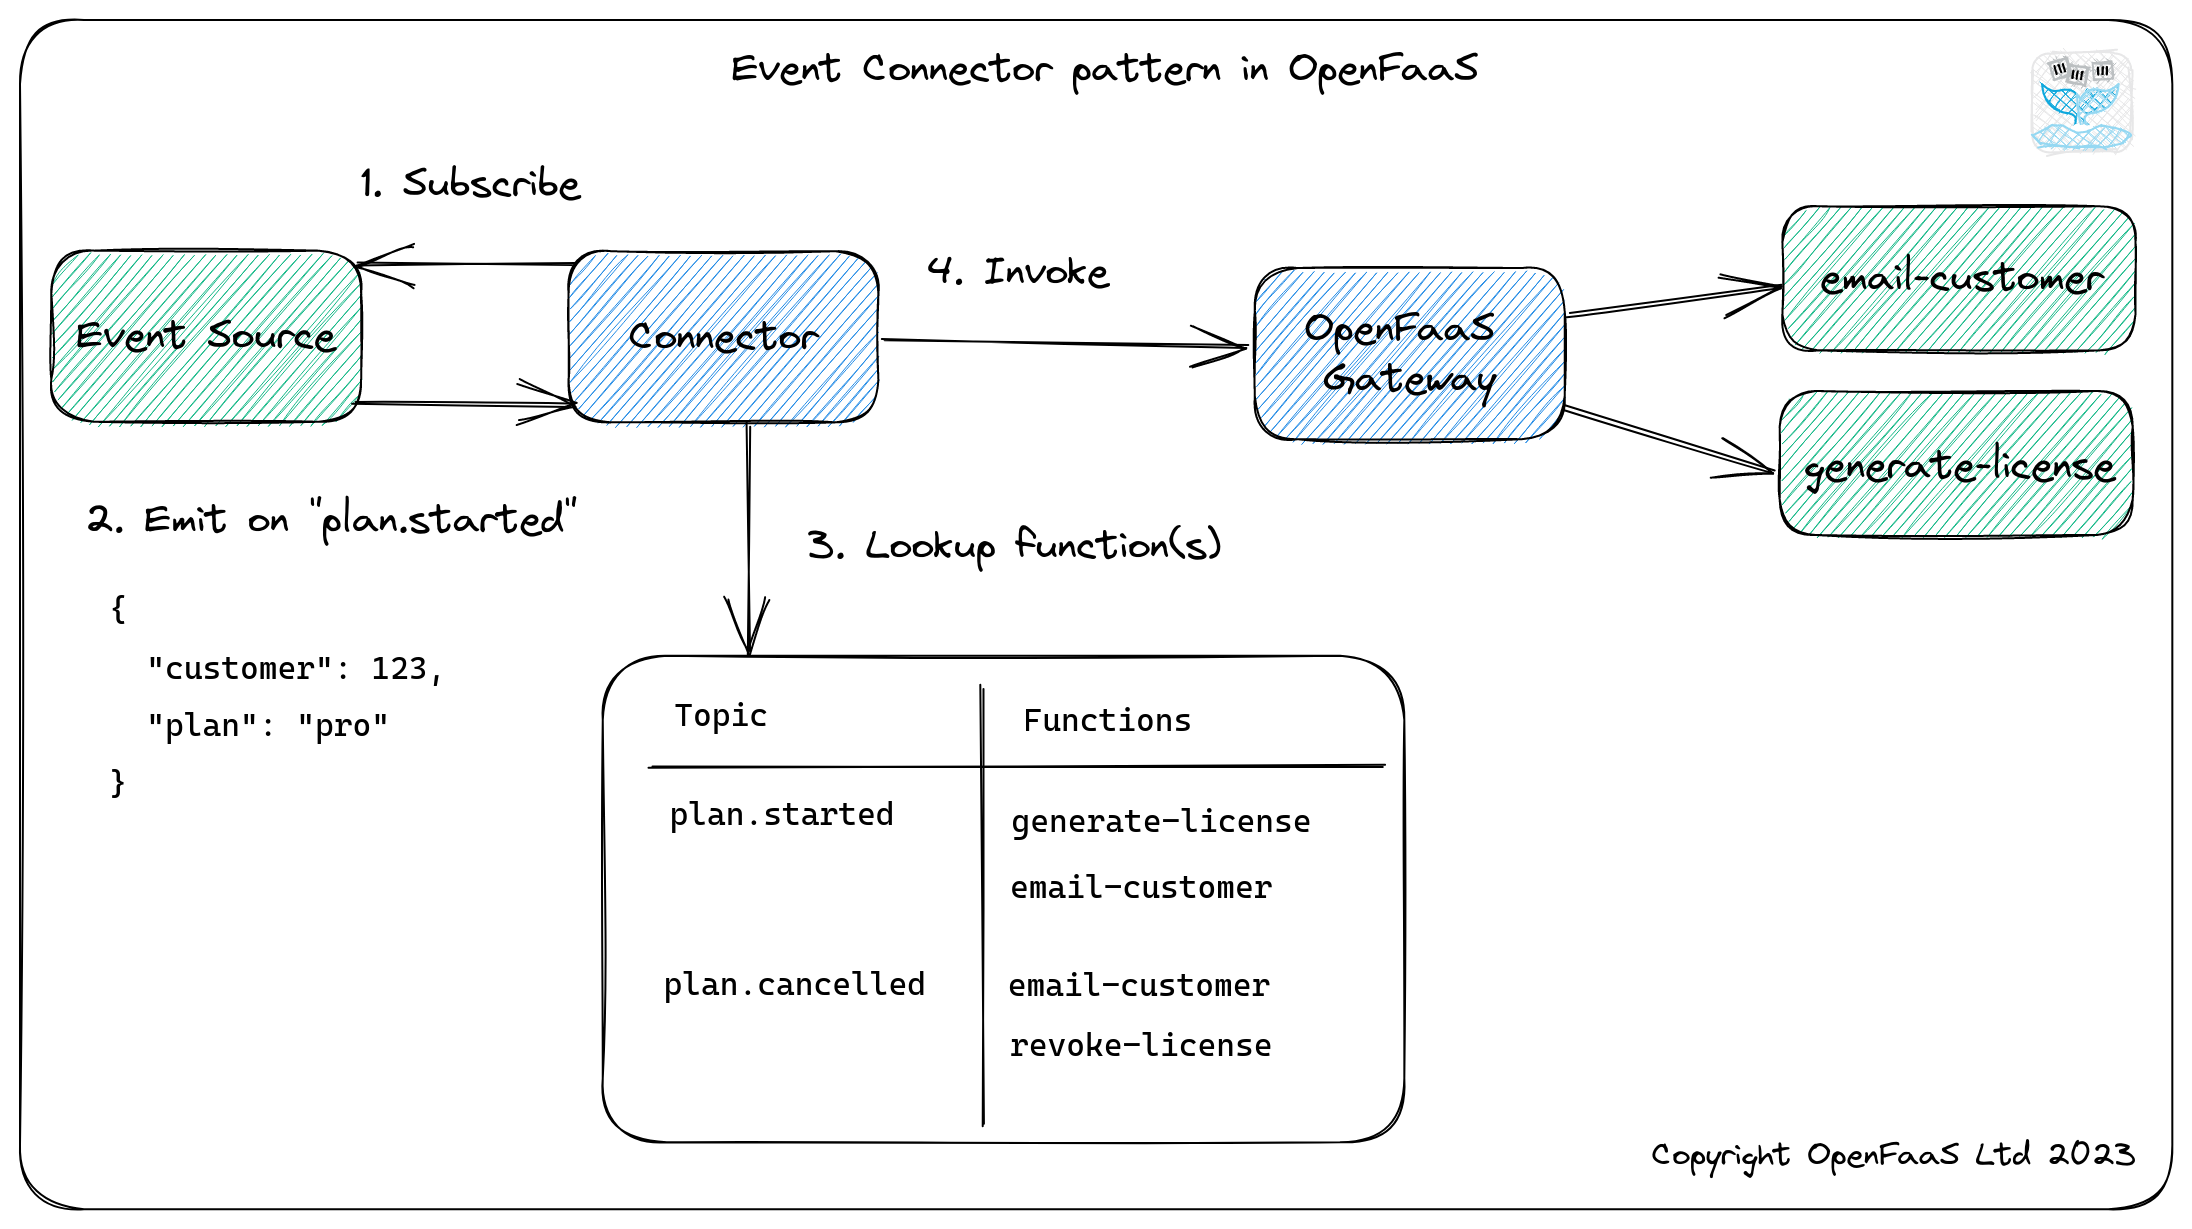 OpenFaas Event-Connector Pattern